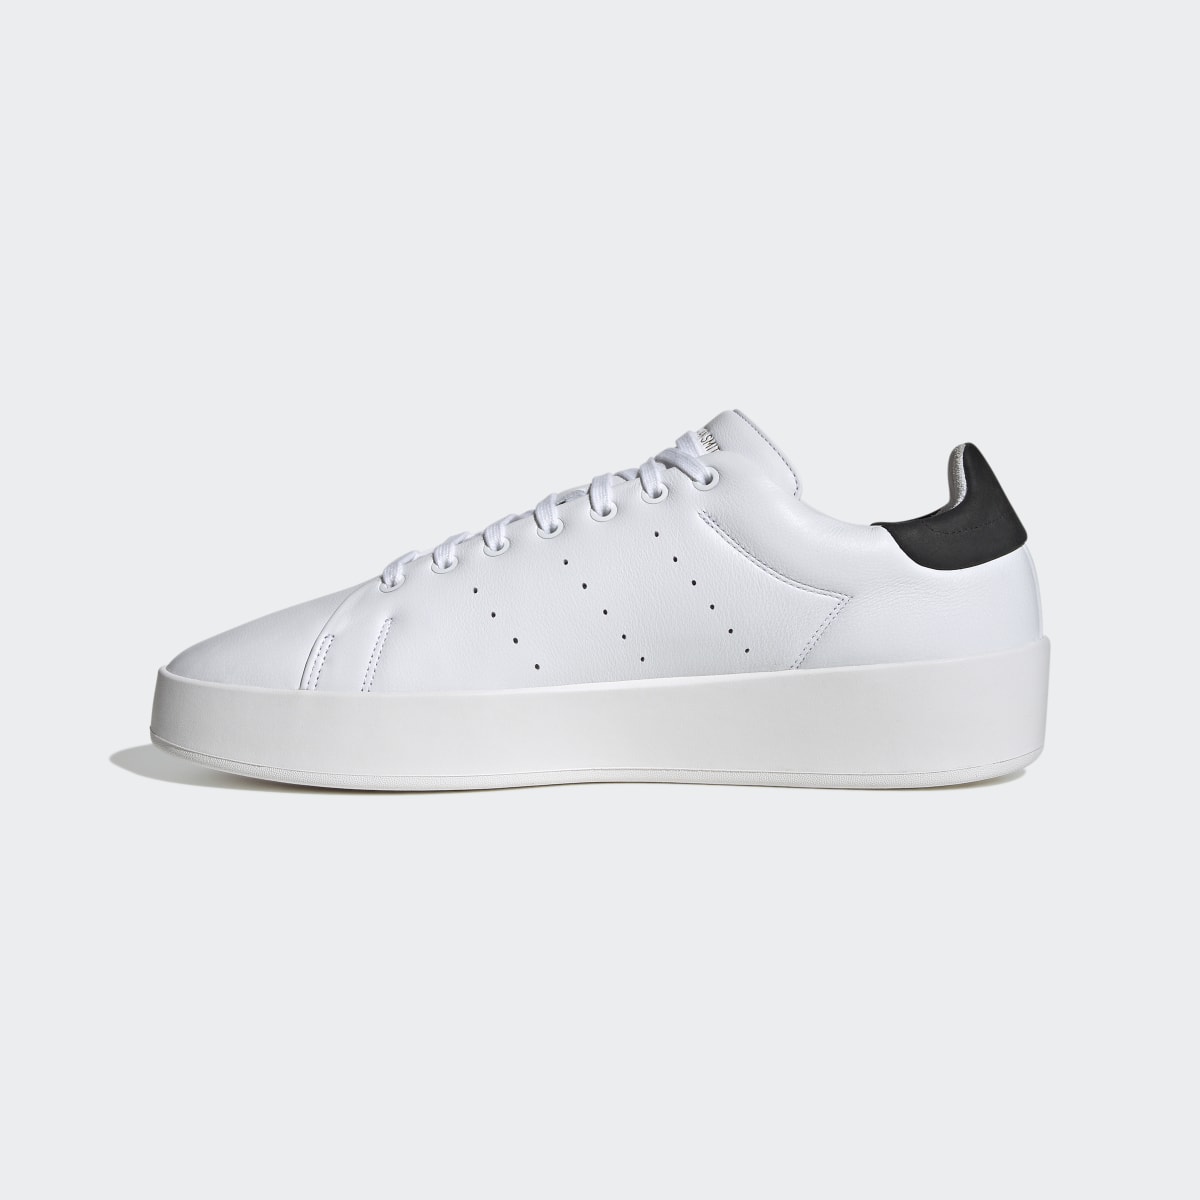 Adidas Chaussure Stan Smith Recon. 7